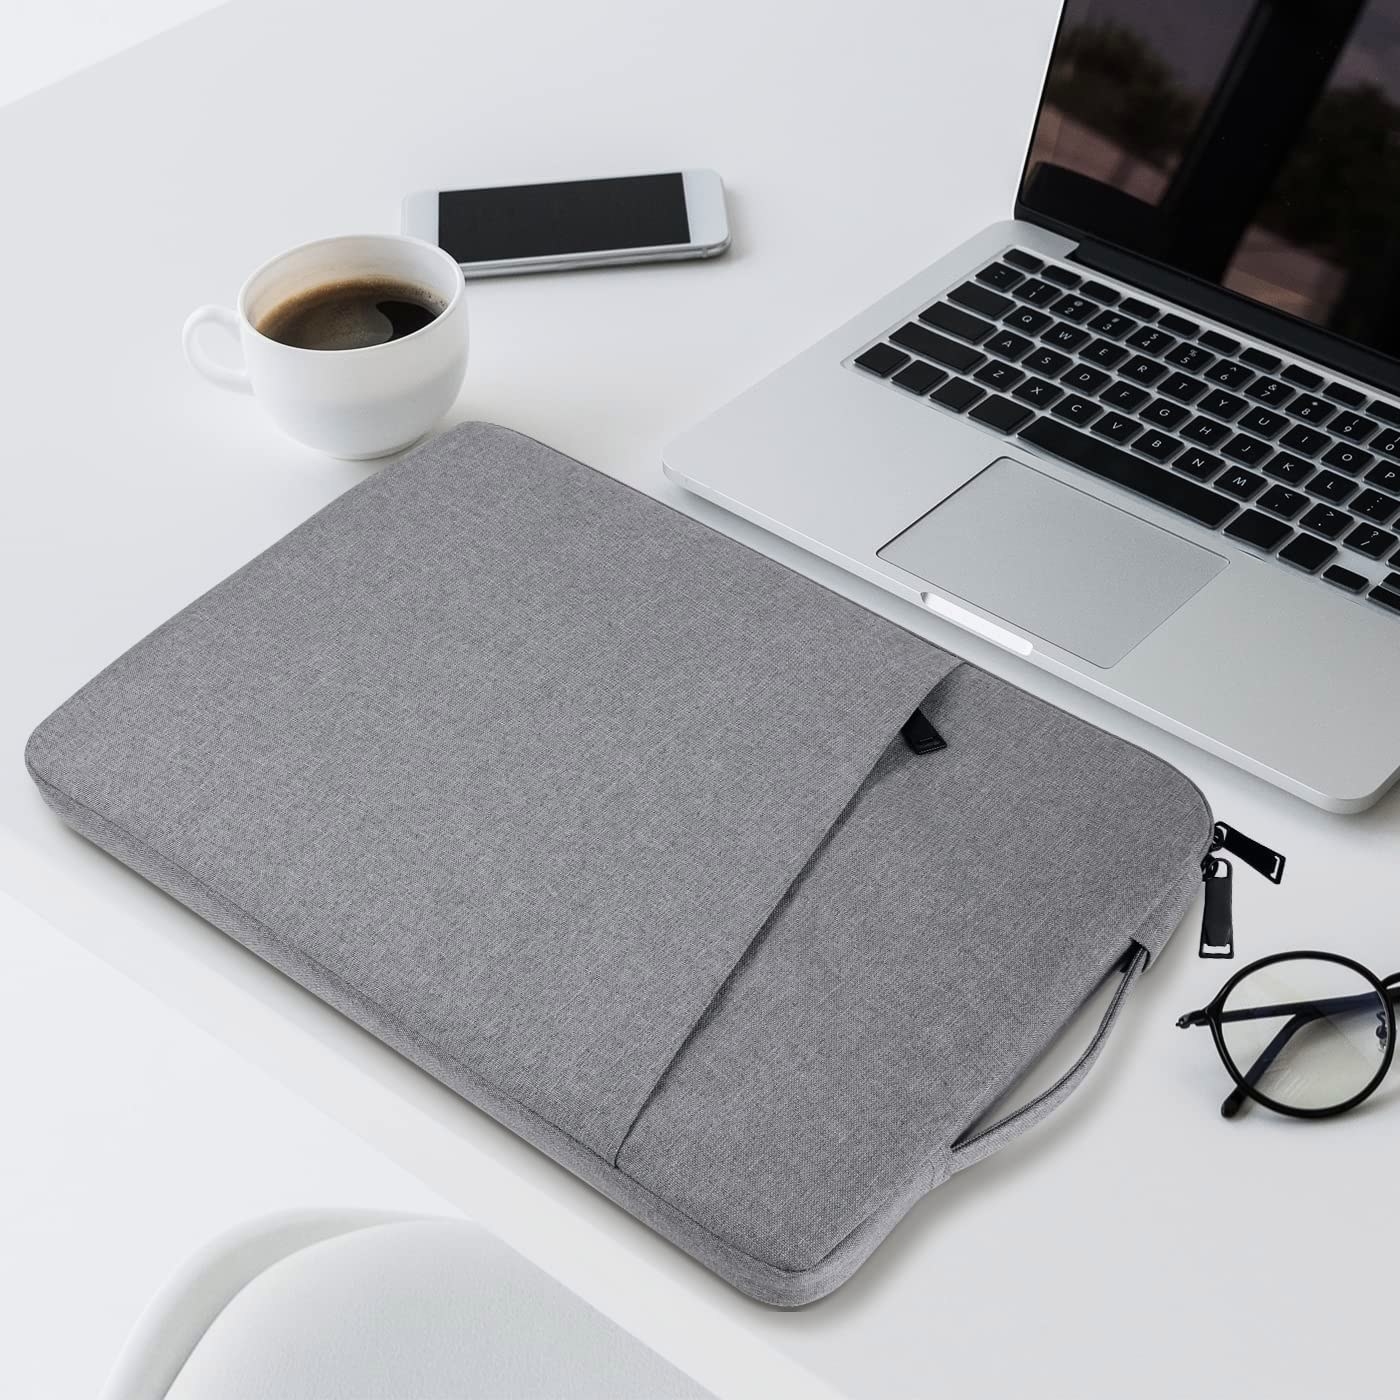 a laptop sleeve on a clean surface next to a laptop, phone, and coffee